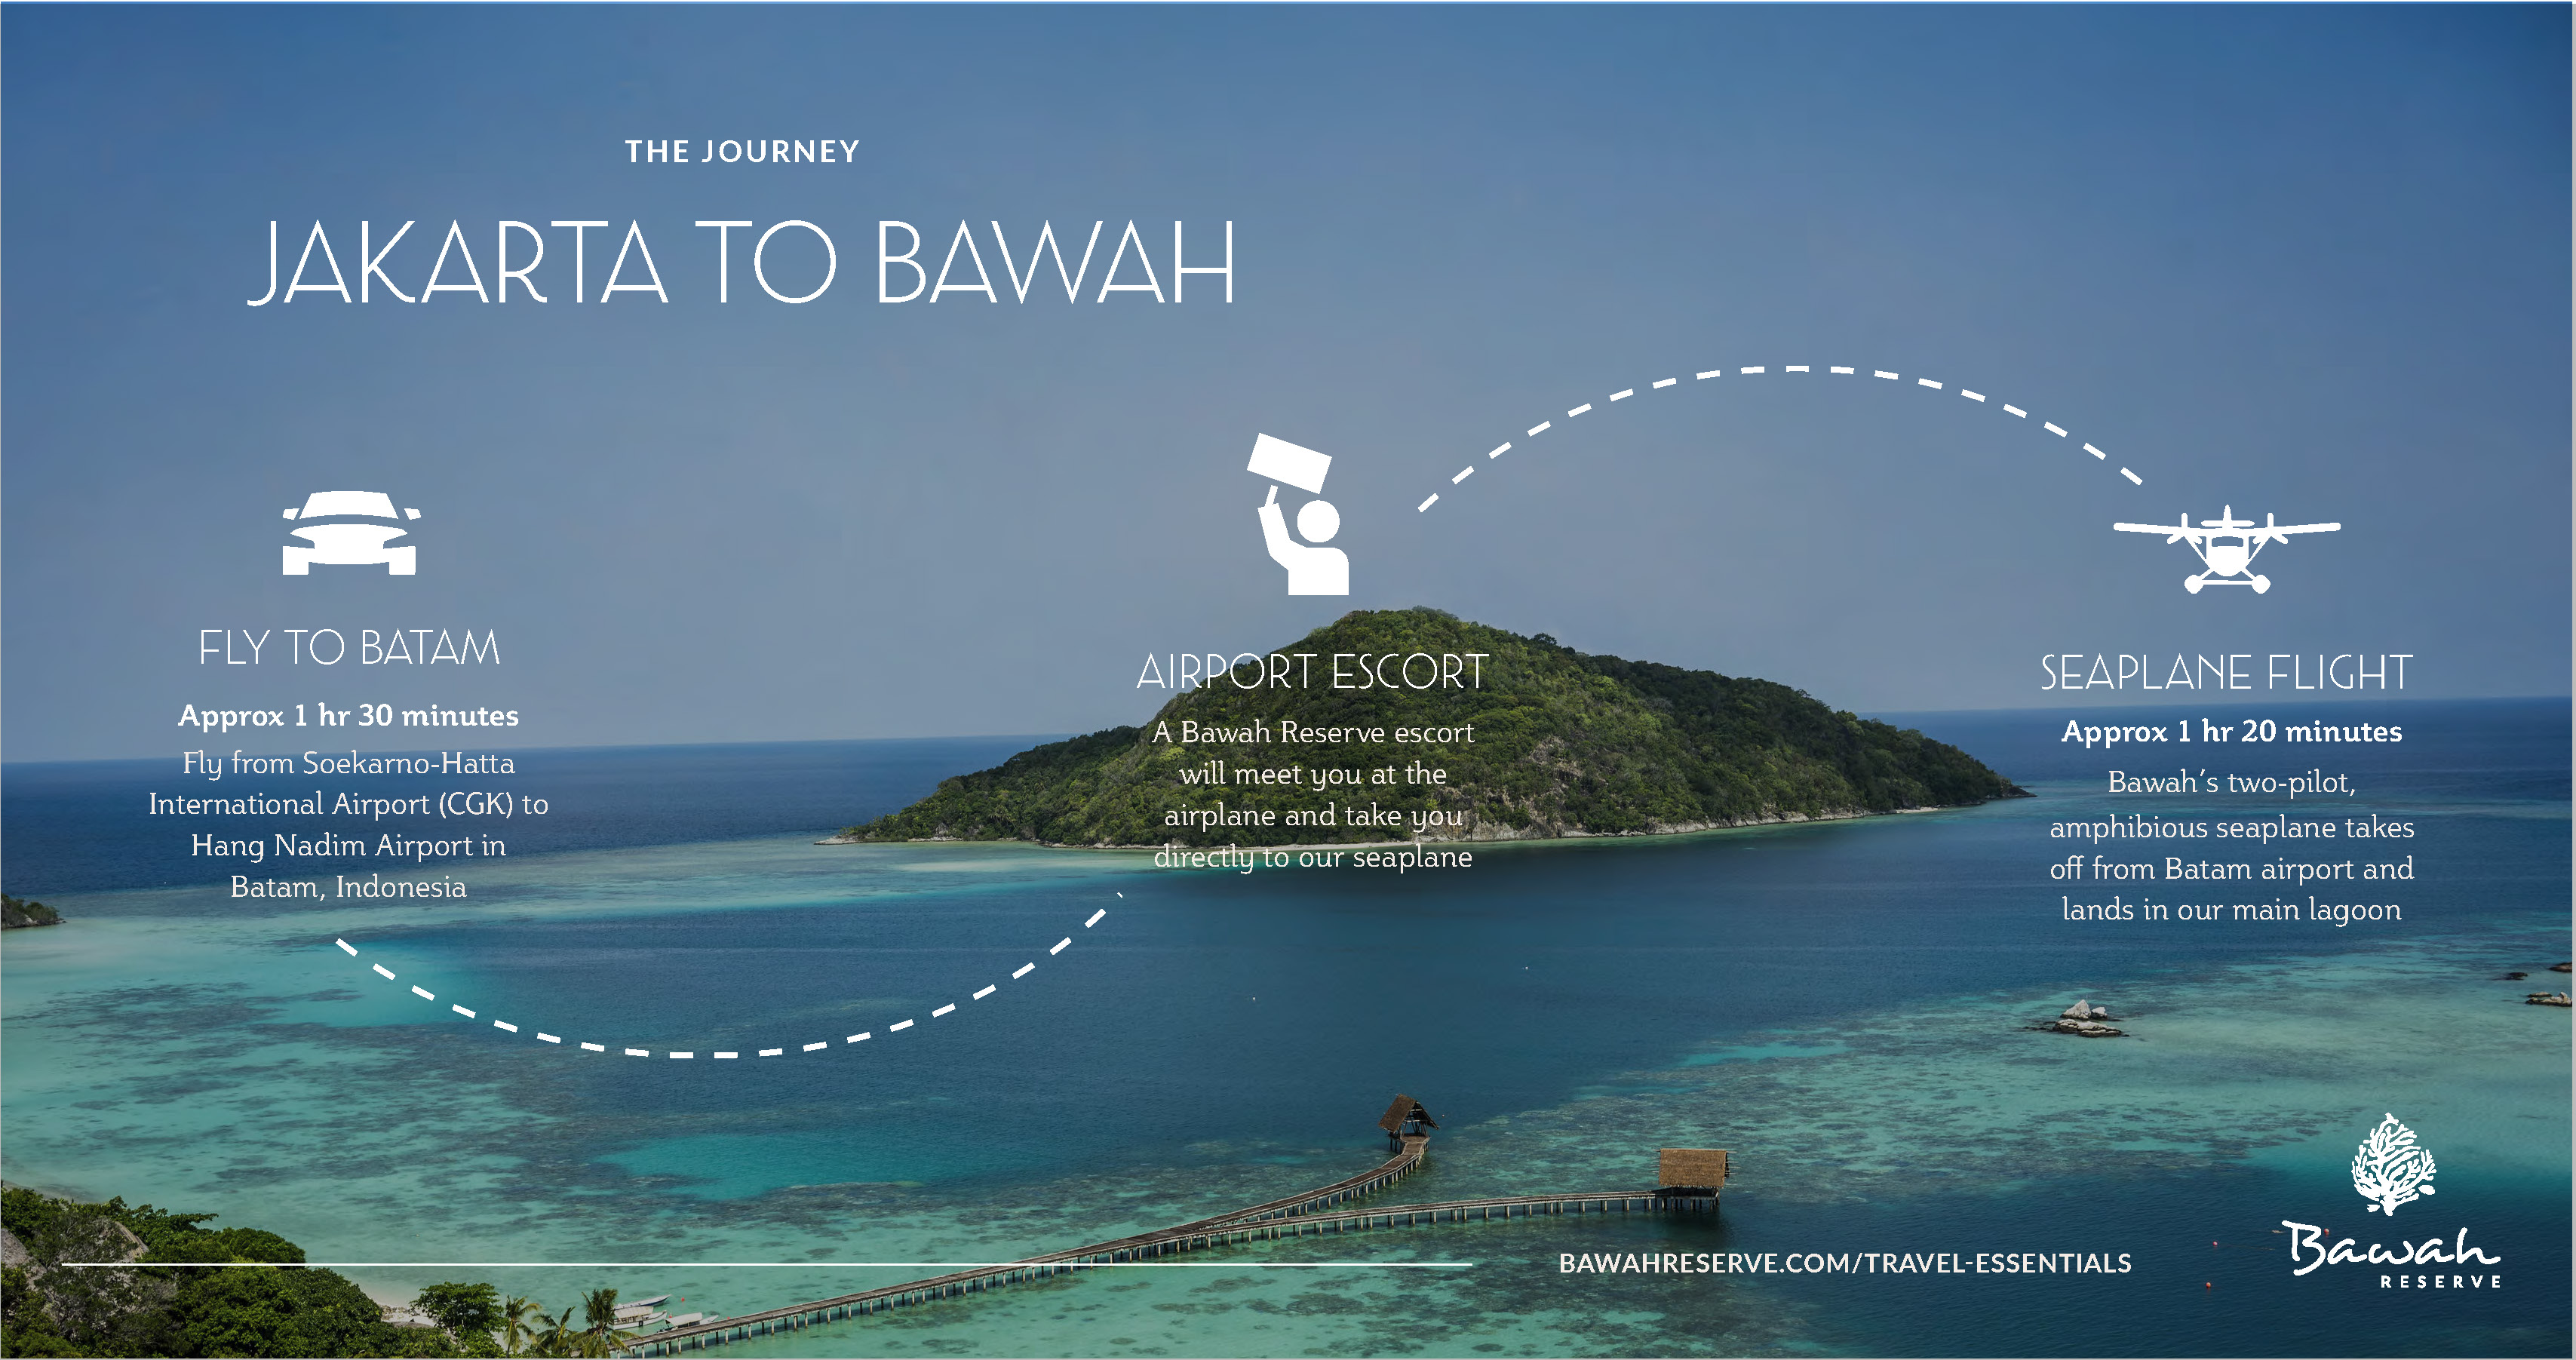 How to get to Bawah Reserve from Jakarta